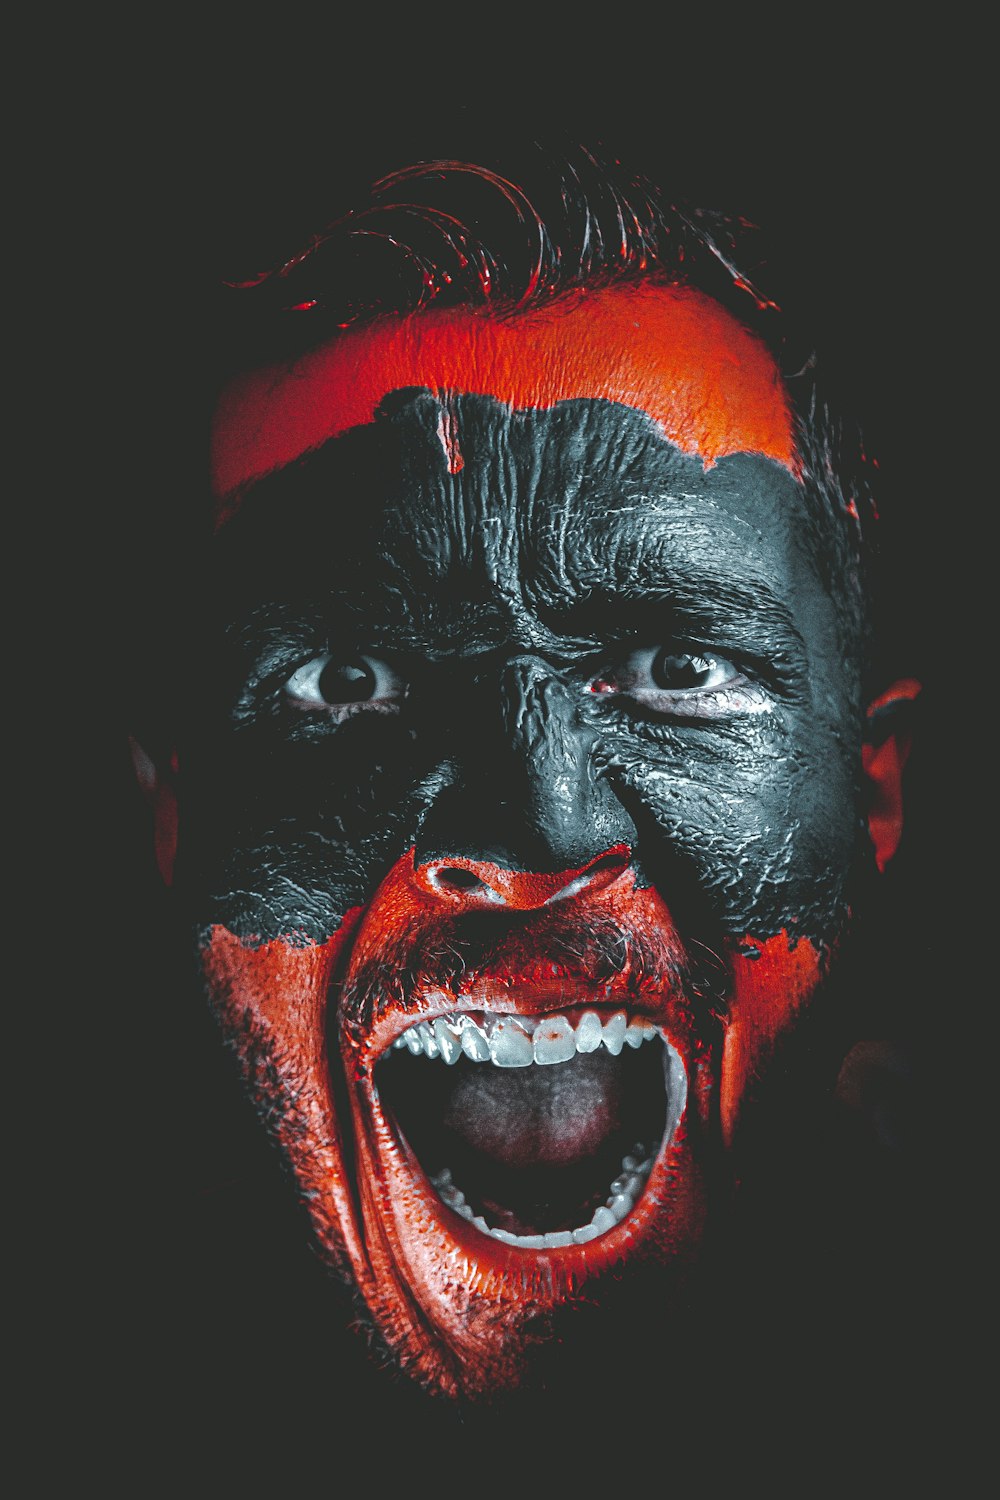 Person with red and black face paint photo – Free Mouth Image on Unsplash